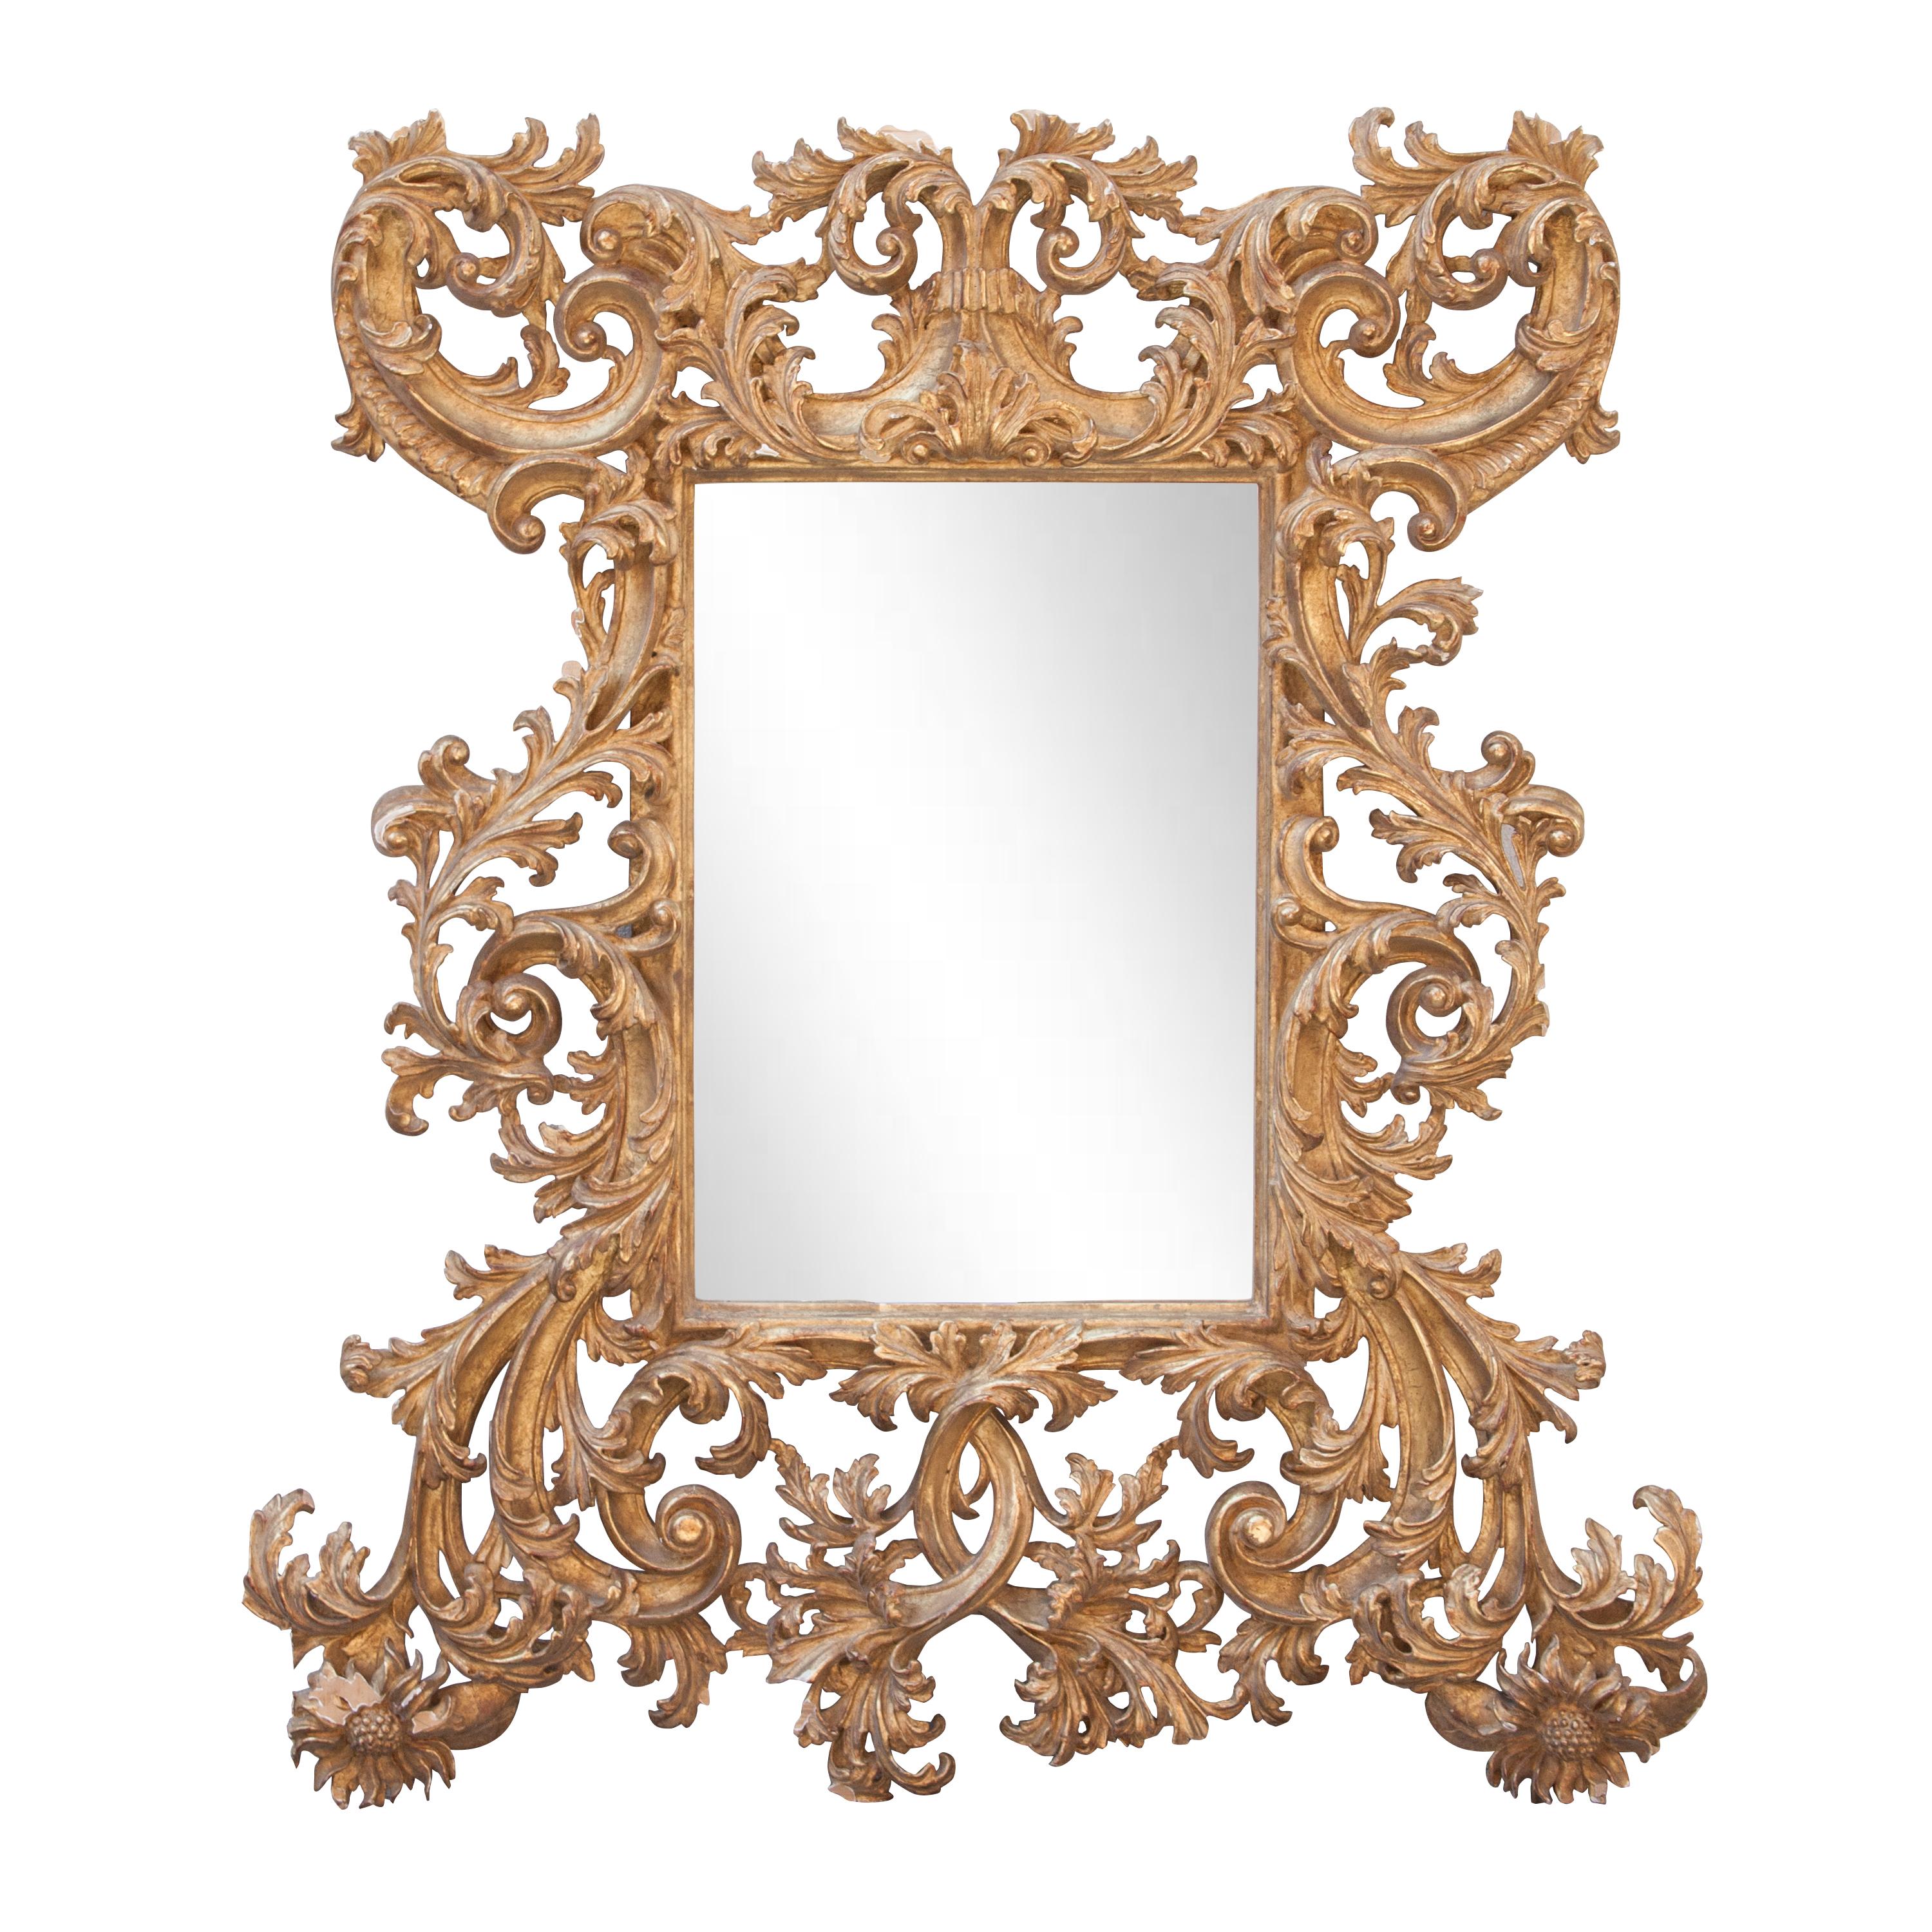 Handcrafted carved Chippendale style wood mirror covered in gold foil.